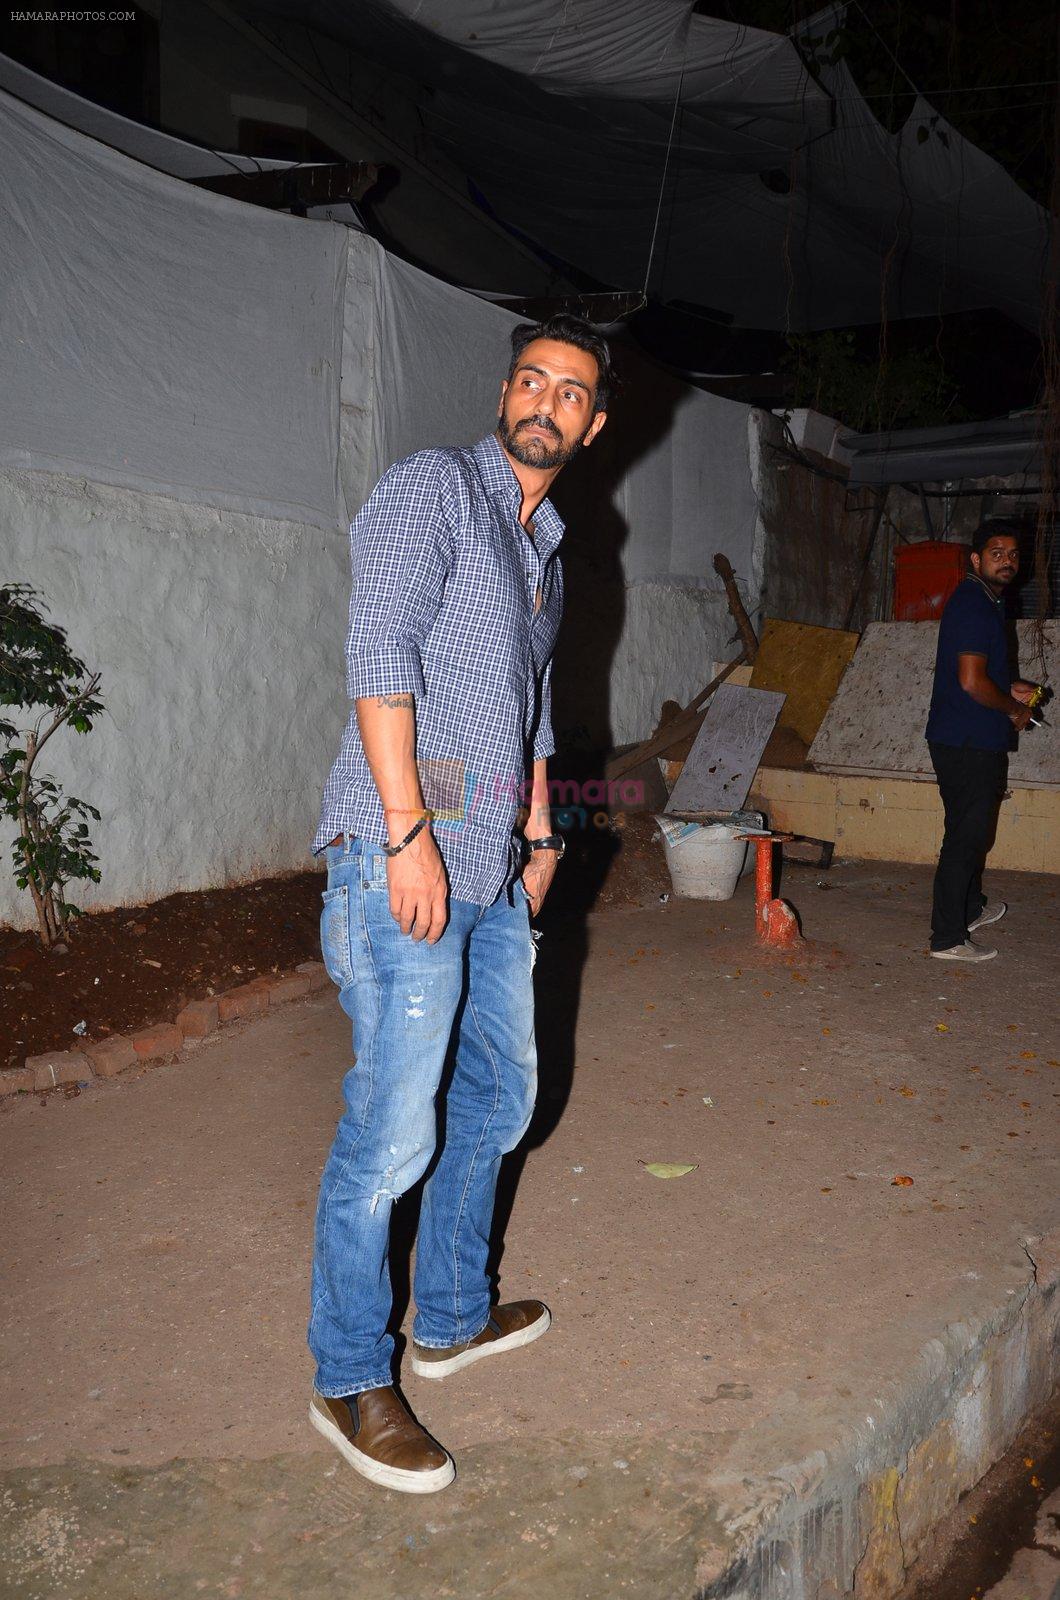 Arjun Rampal snapped post dinner in Bandra on 12th March 2016